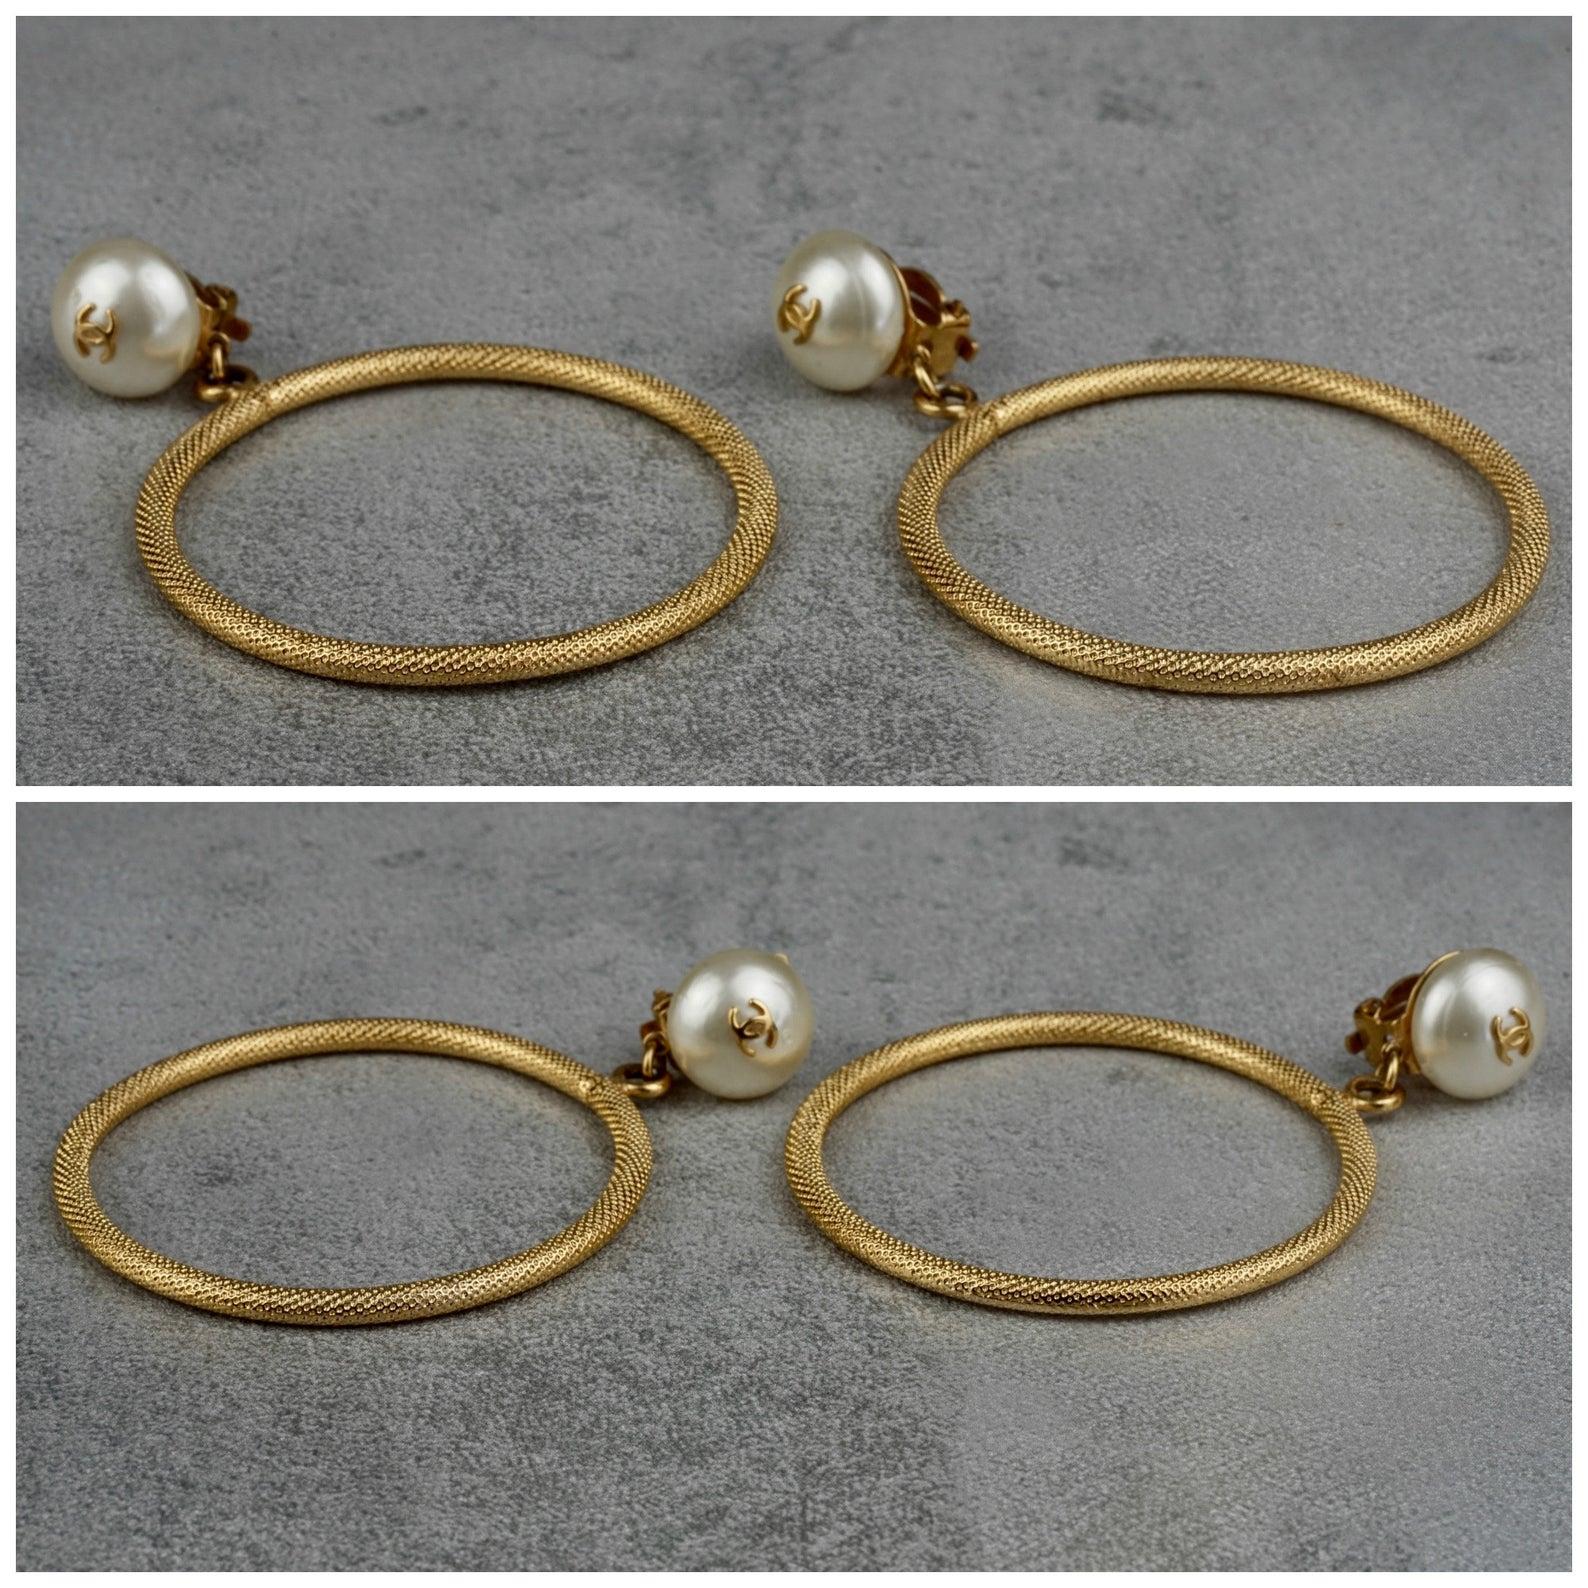 Vintage 1997 Jumbo CHANEL Logo Pearl Hoop Earrings

Measurements:
Height: 2.95 inches (7.5 cm)
Diameter: 2 inches (5.2 cm)
Weight per Earrings: 12 gram

Features:
- 100% Authentic CHANEL.
- Pearl CC earrings with textured dangling hoops.
- Signed